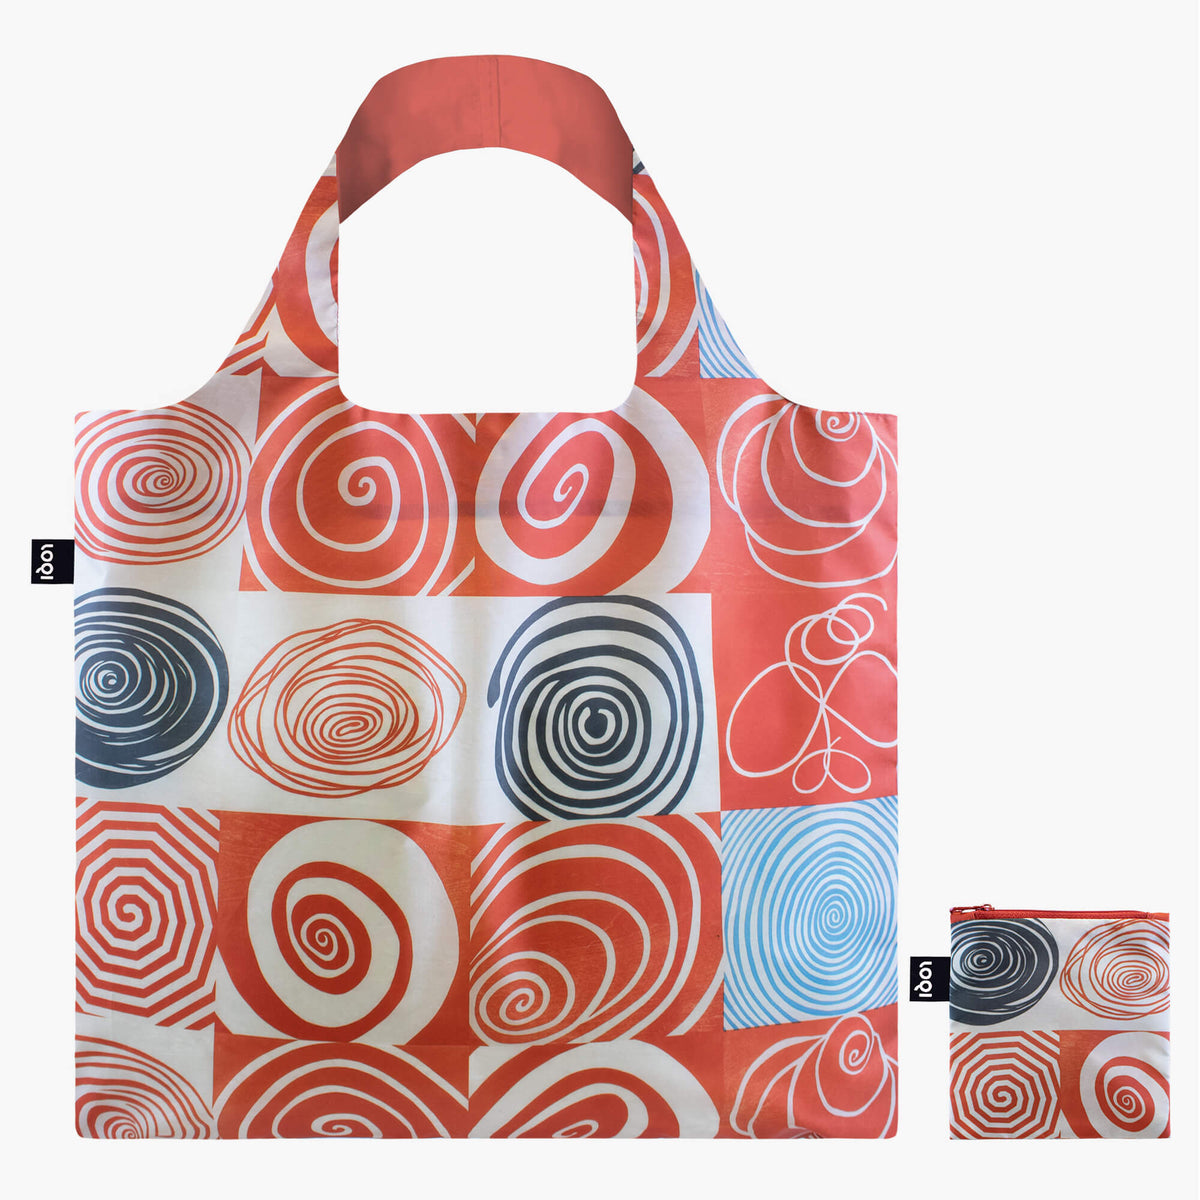 Spiral Grids Recycled Bag